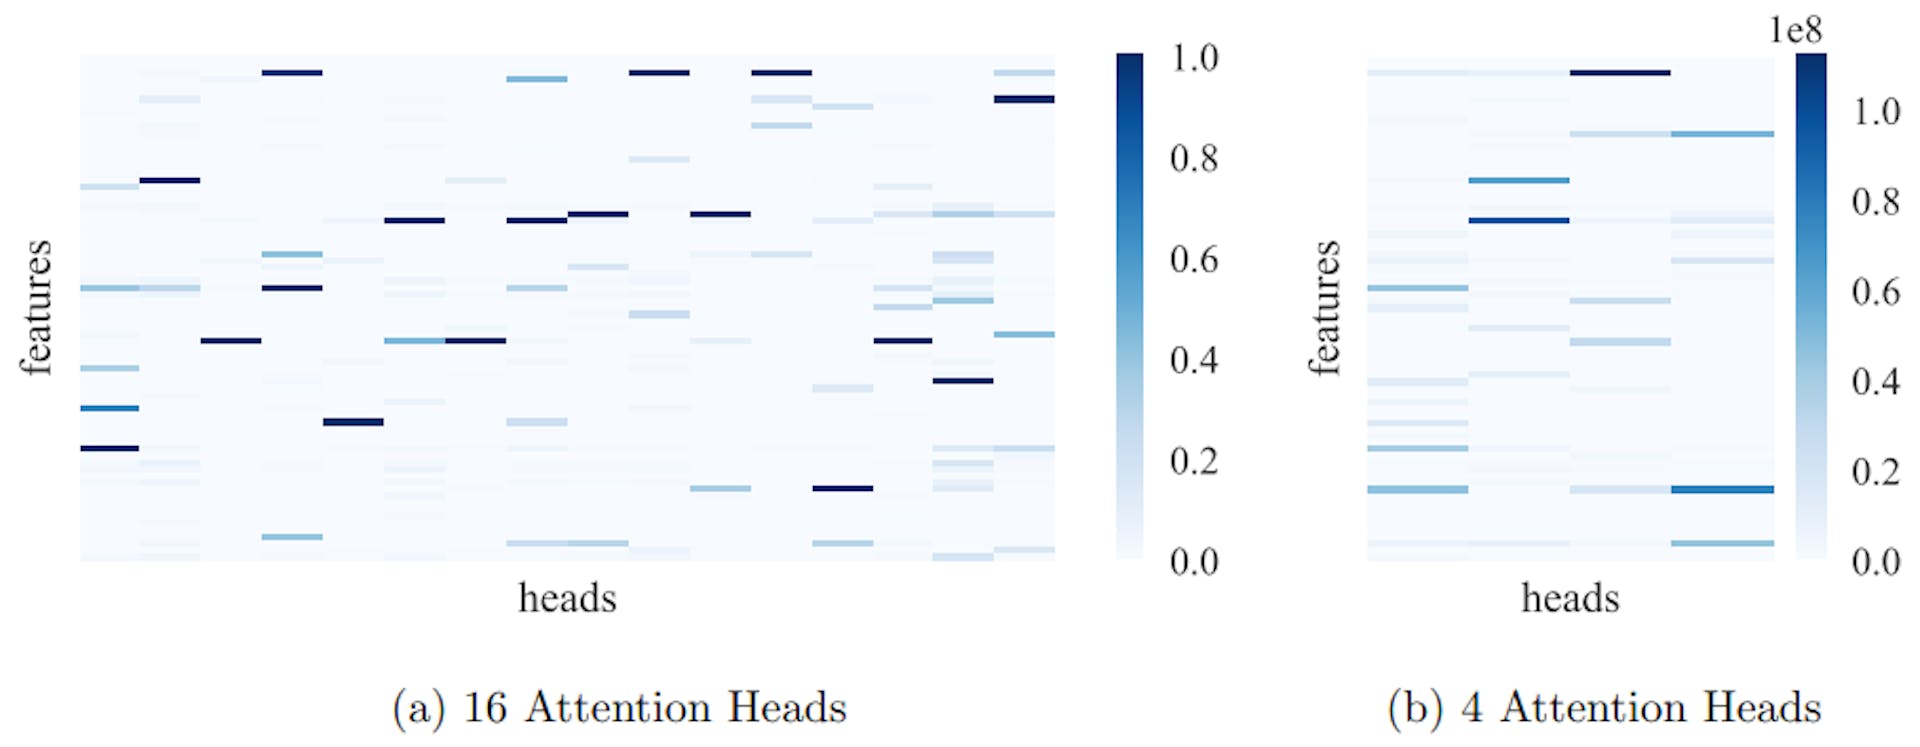 Figure 3: Heatmaps generated from 1. Each column shows the relative importance of each feature in a head, and each column corresponds to a different head.